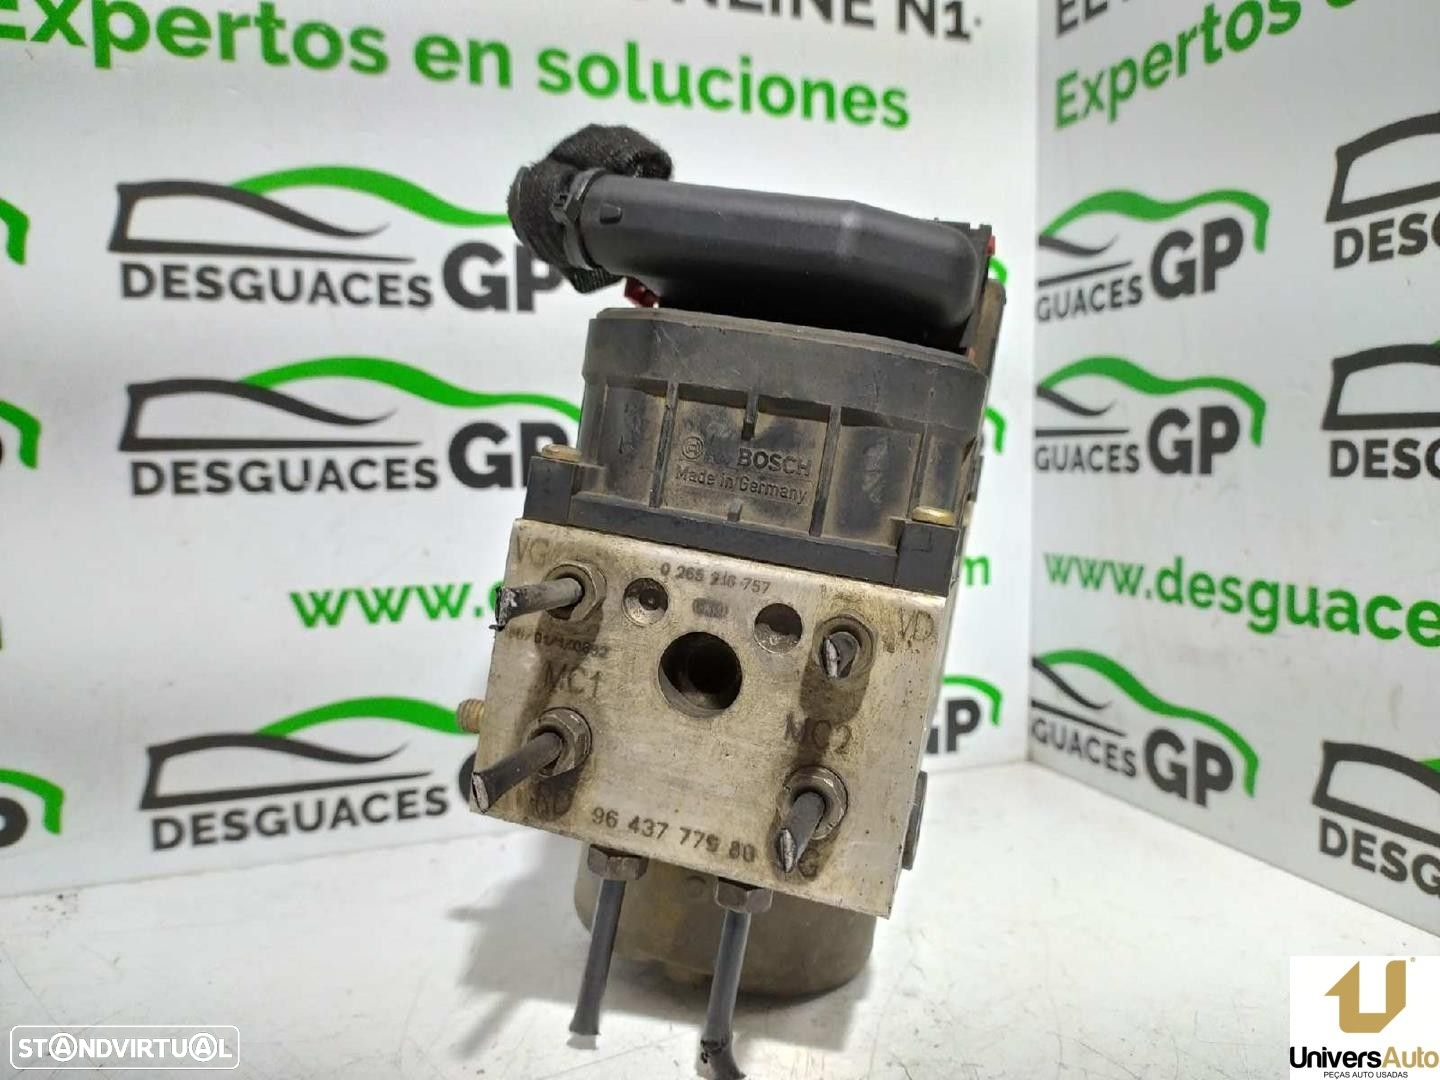 ABS PEUGEOT 307 2002 -9643777980 - 4